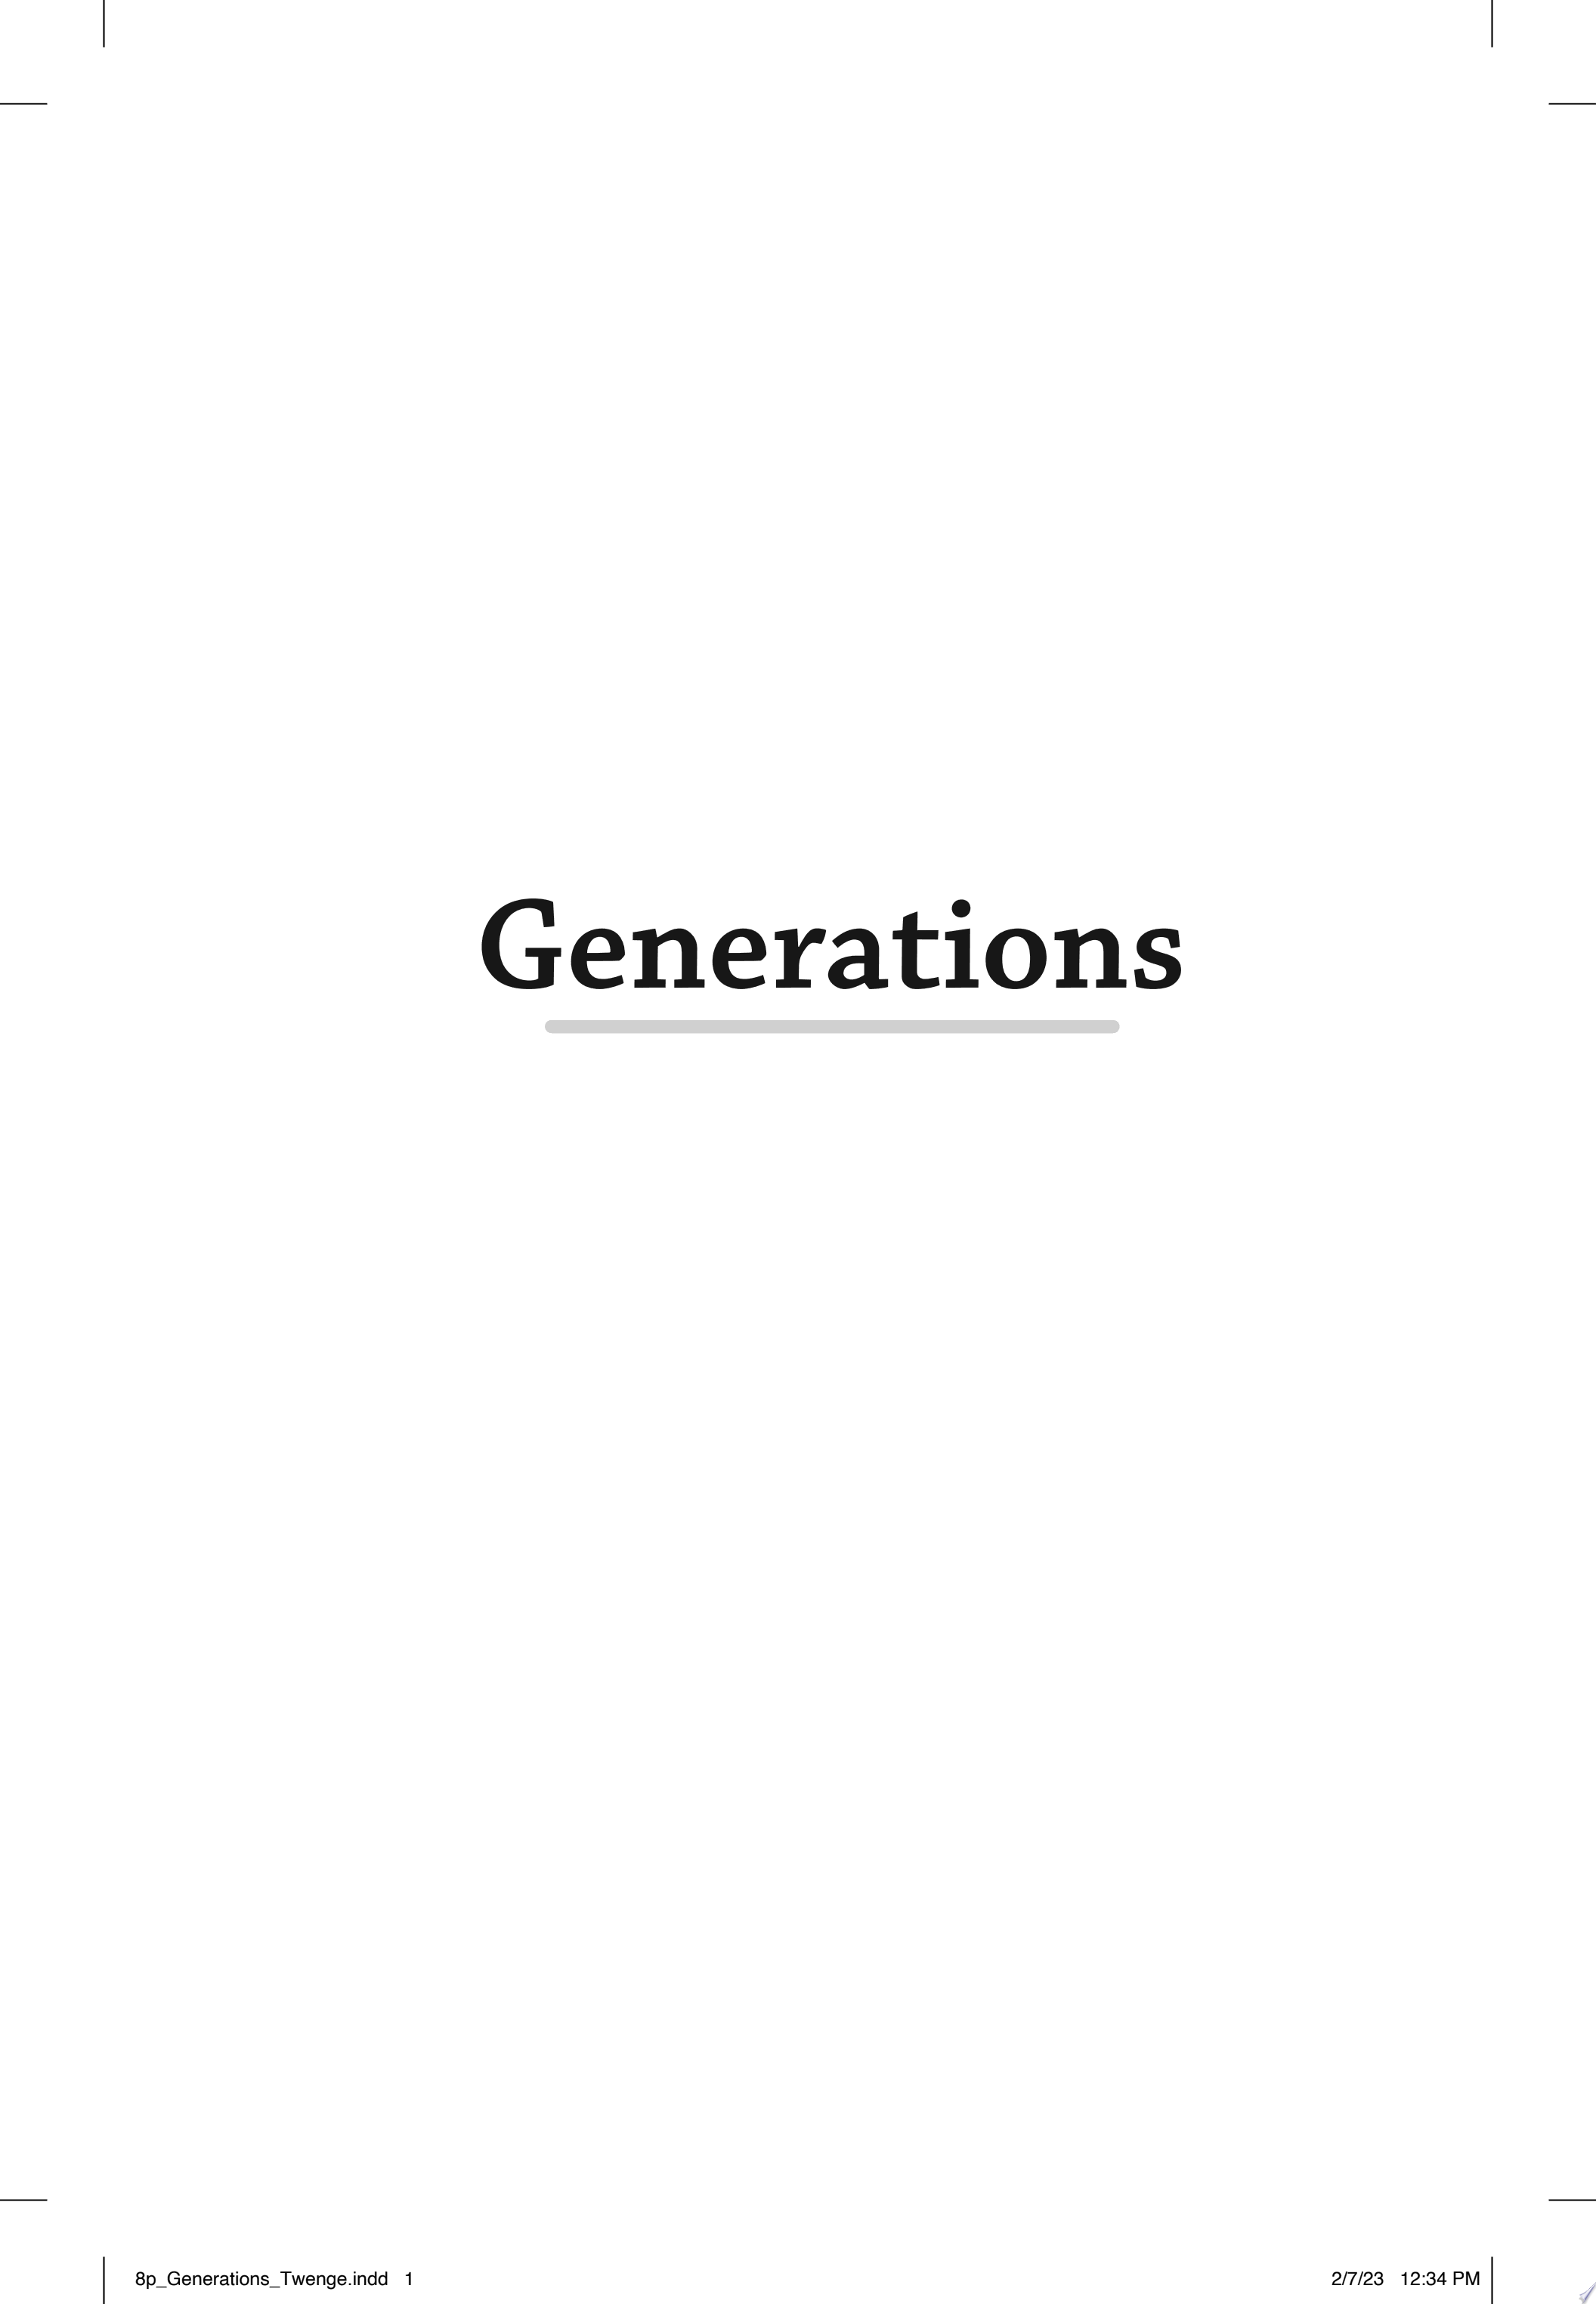 Image for "Generations"